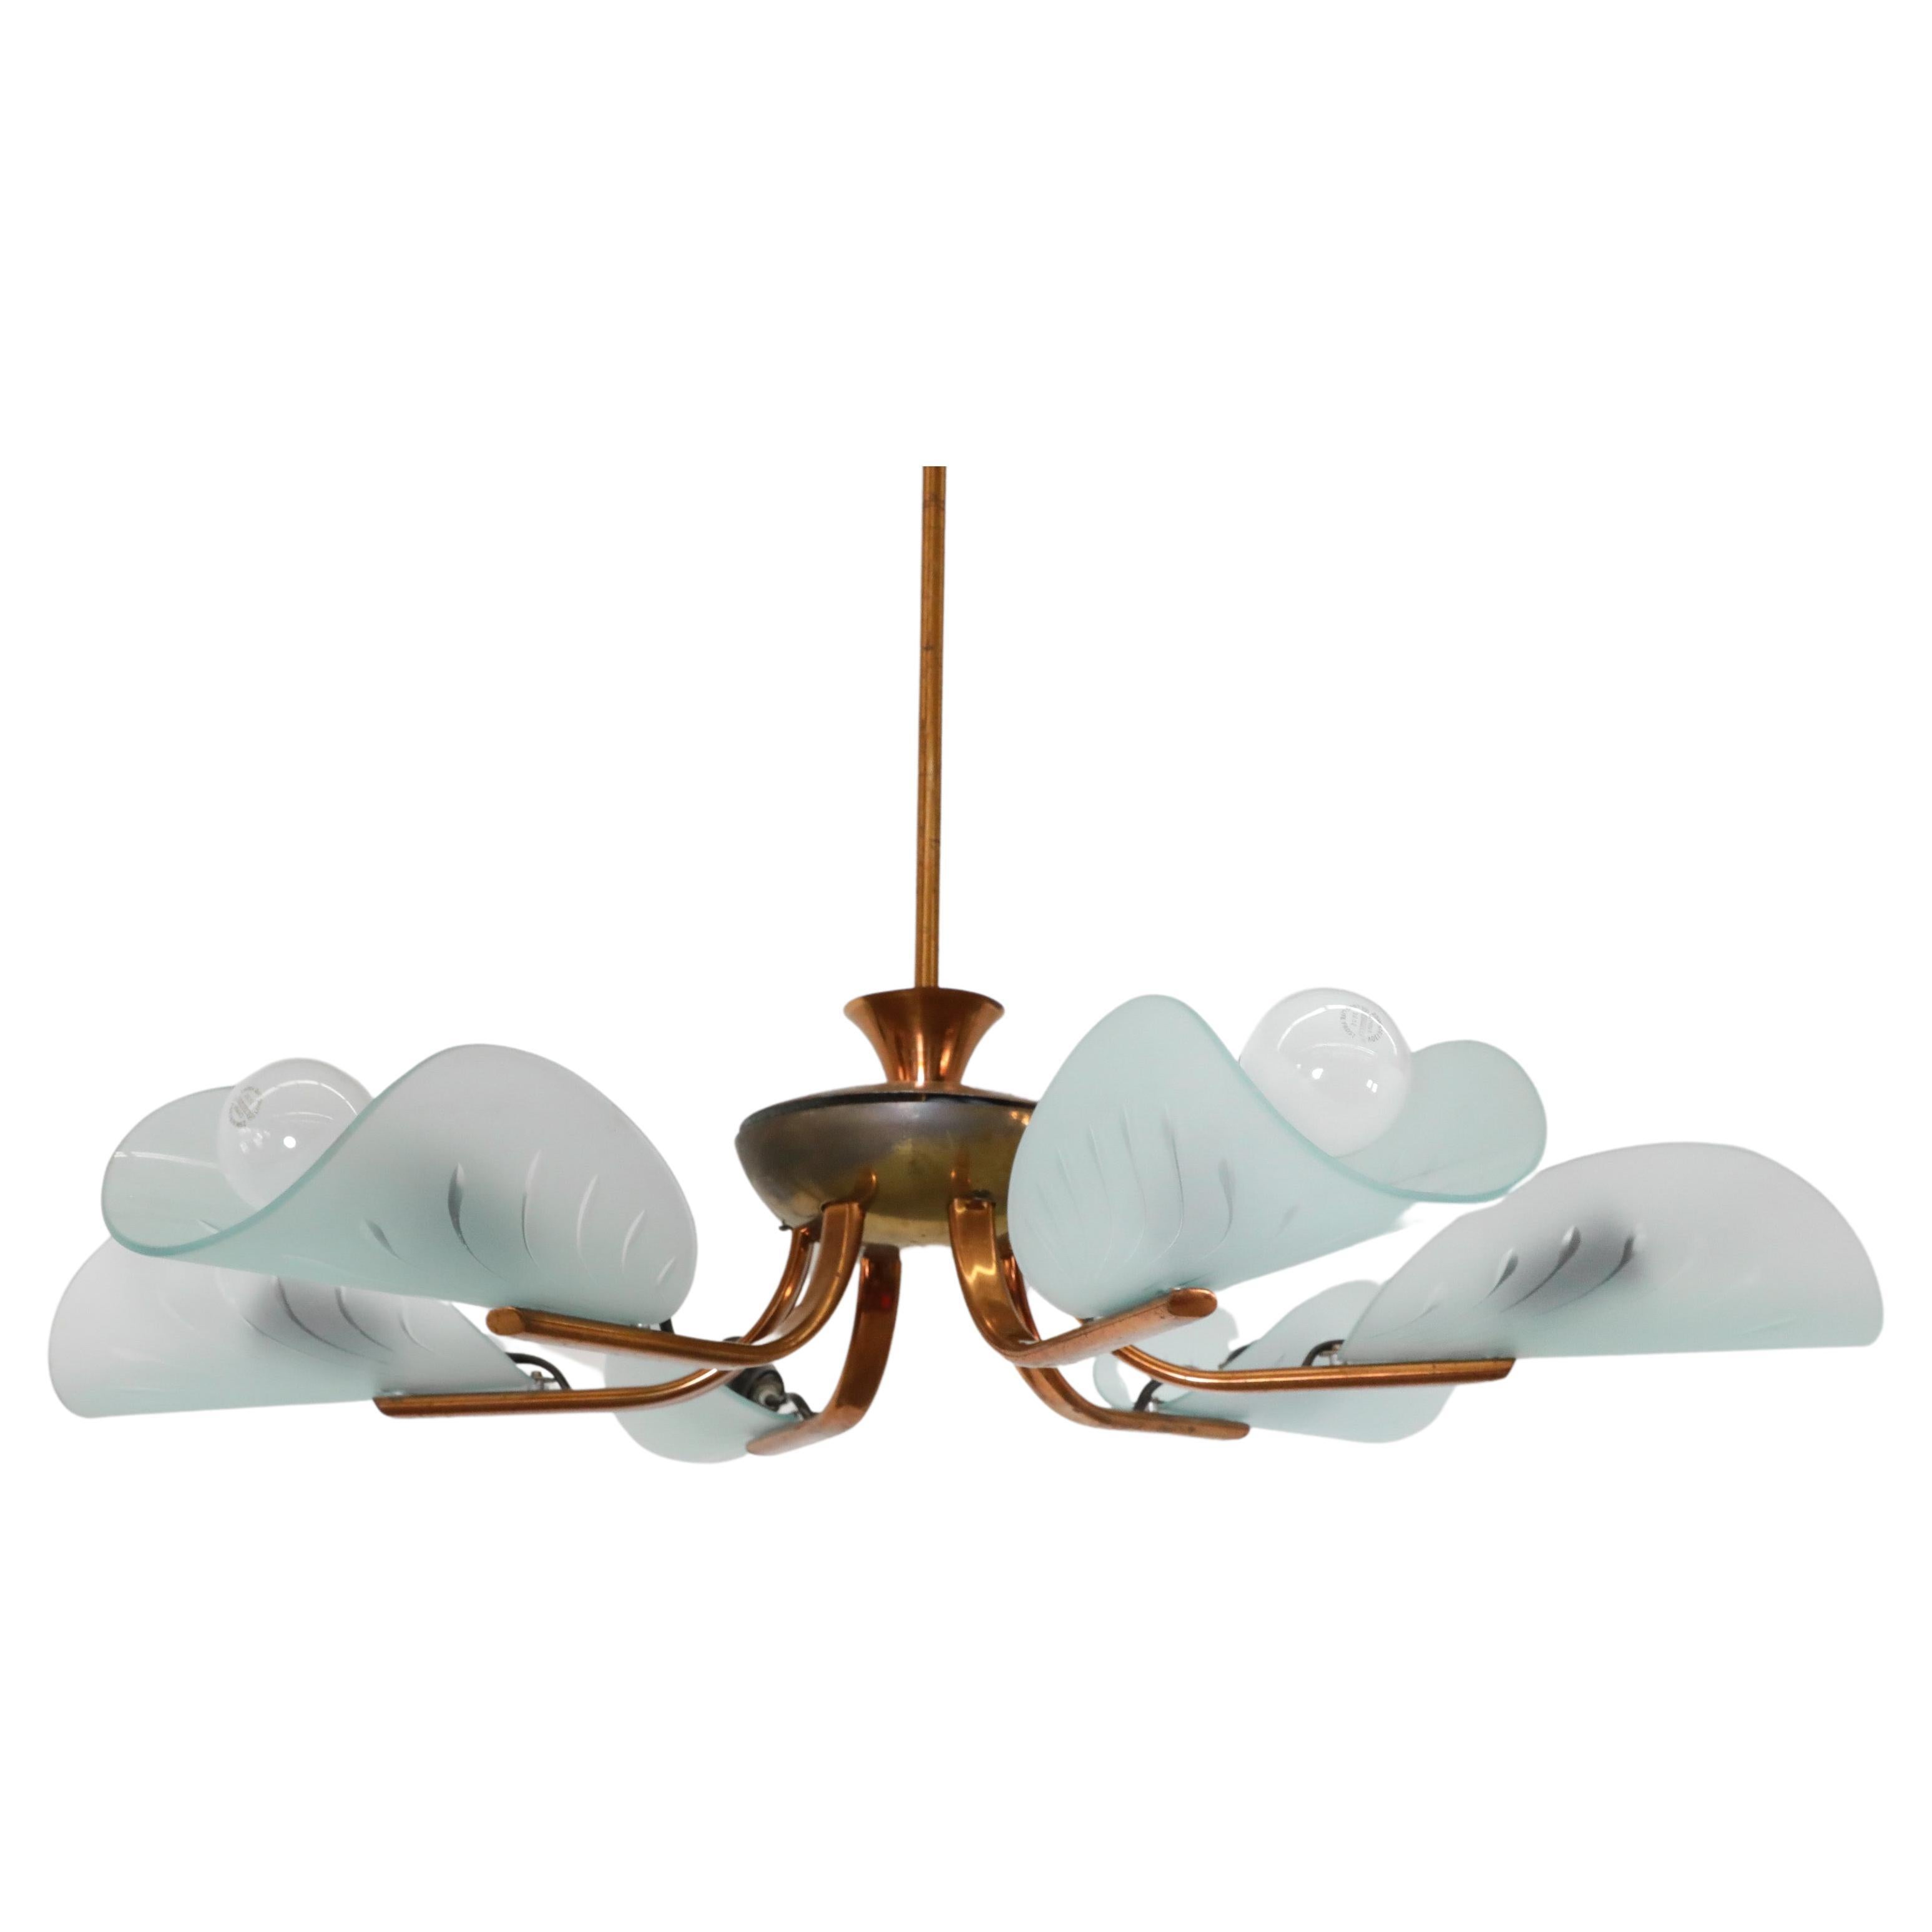 Art Deco Valinte Oy style Copper and Brass Chandelier with Petal Glass Shades For Sale